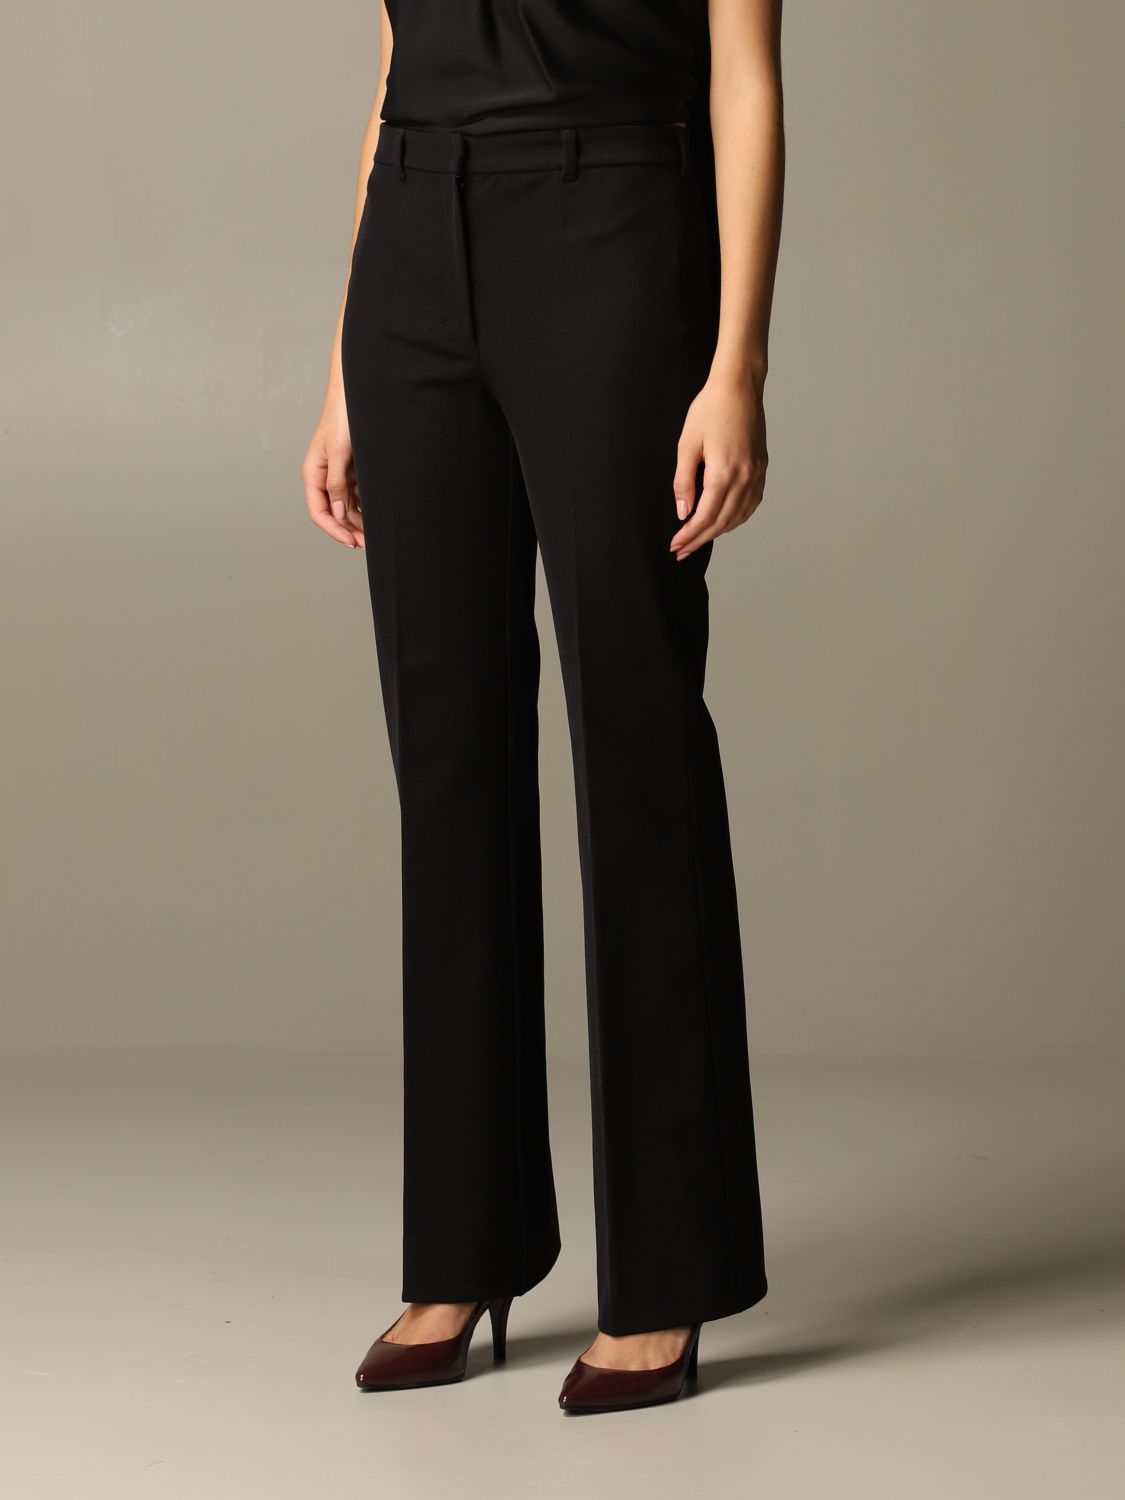 Navona S Max Mara trousers in flare stretch cotton blend | Pants S Max